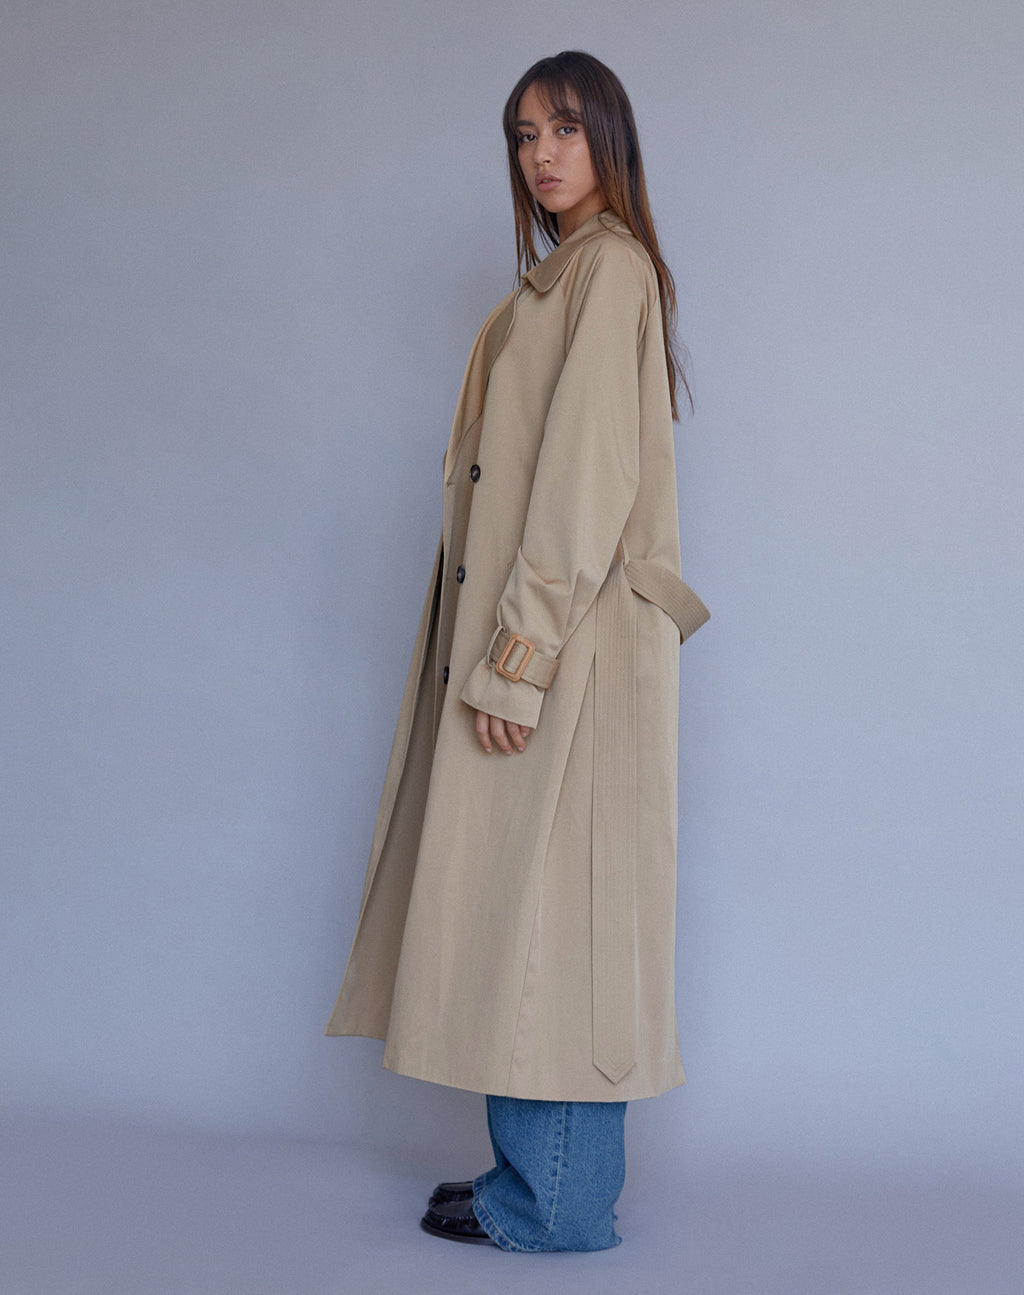 Orcati Double Breasted Trench Coat in Tan